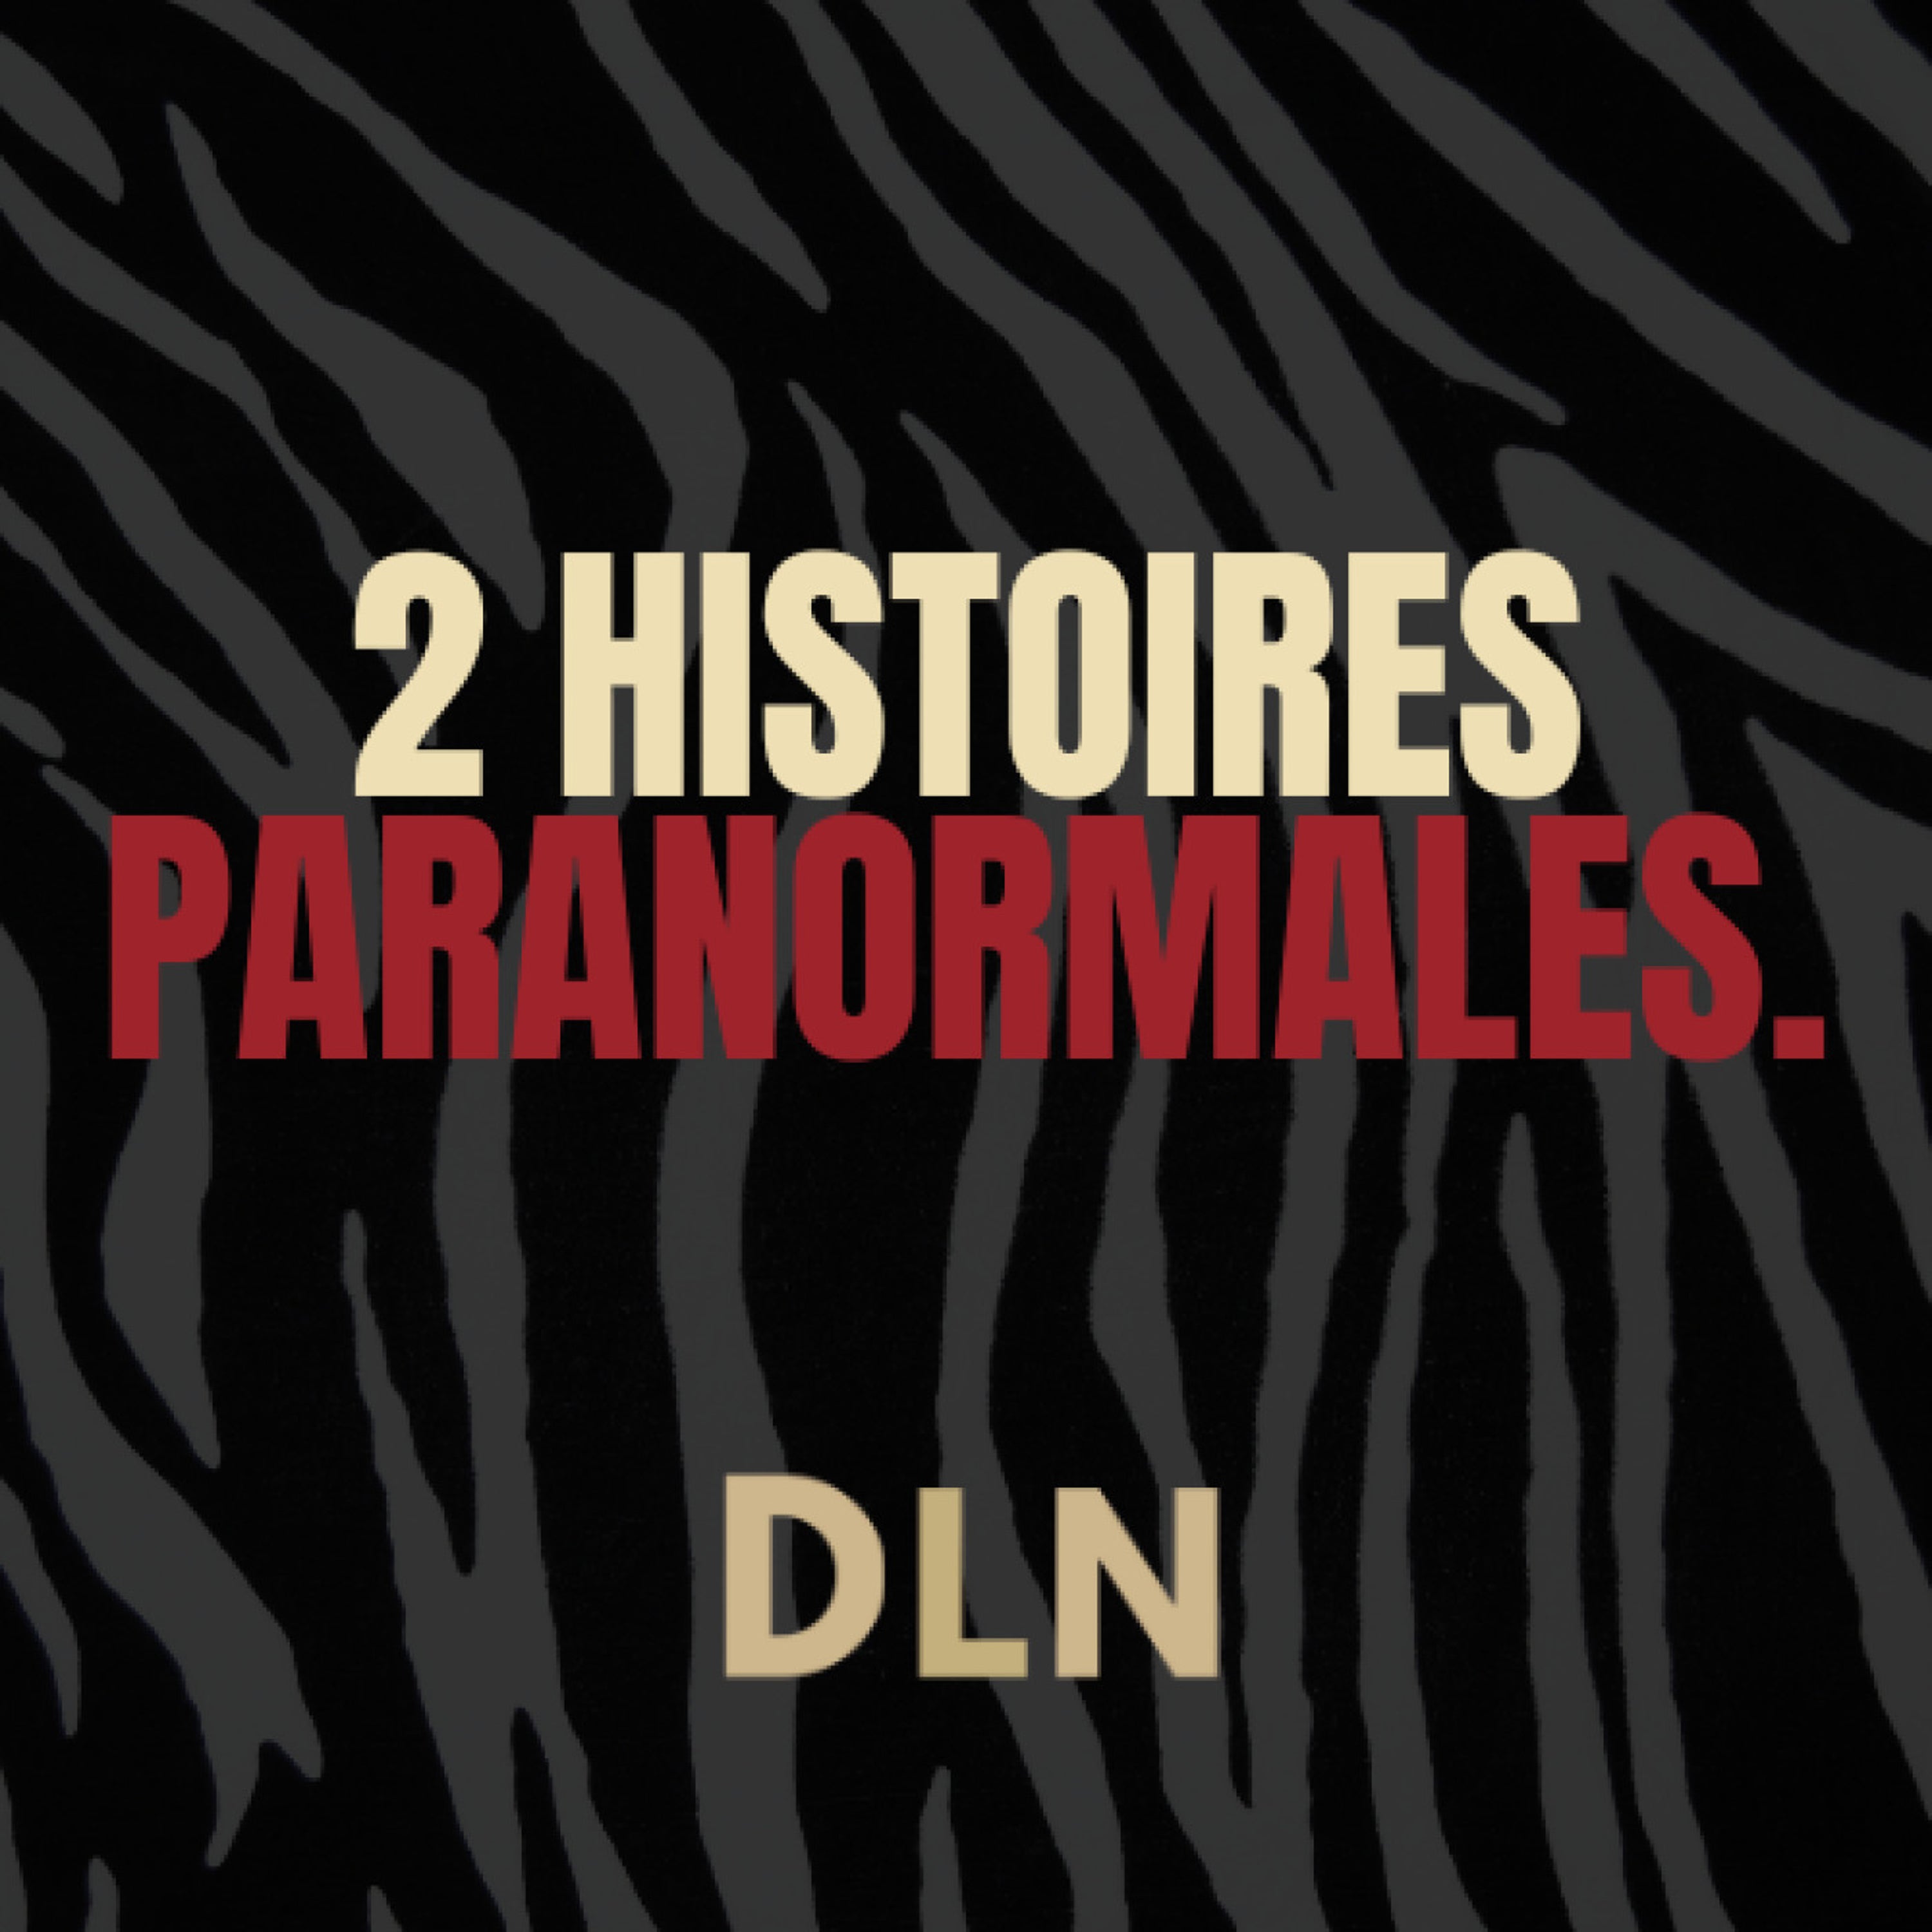 2 Histoires Paranormales.